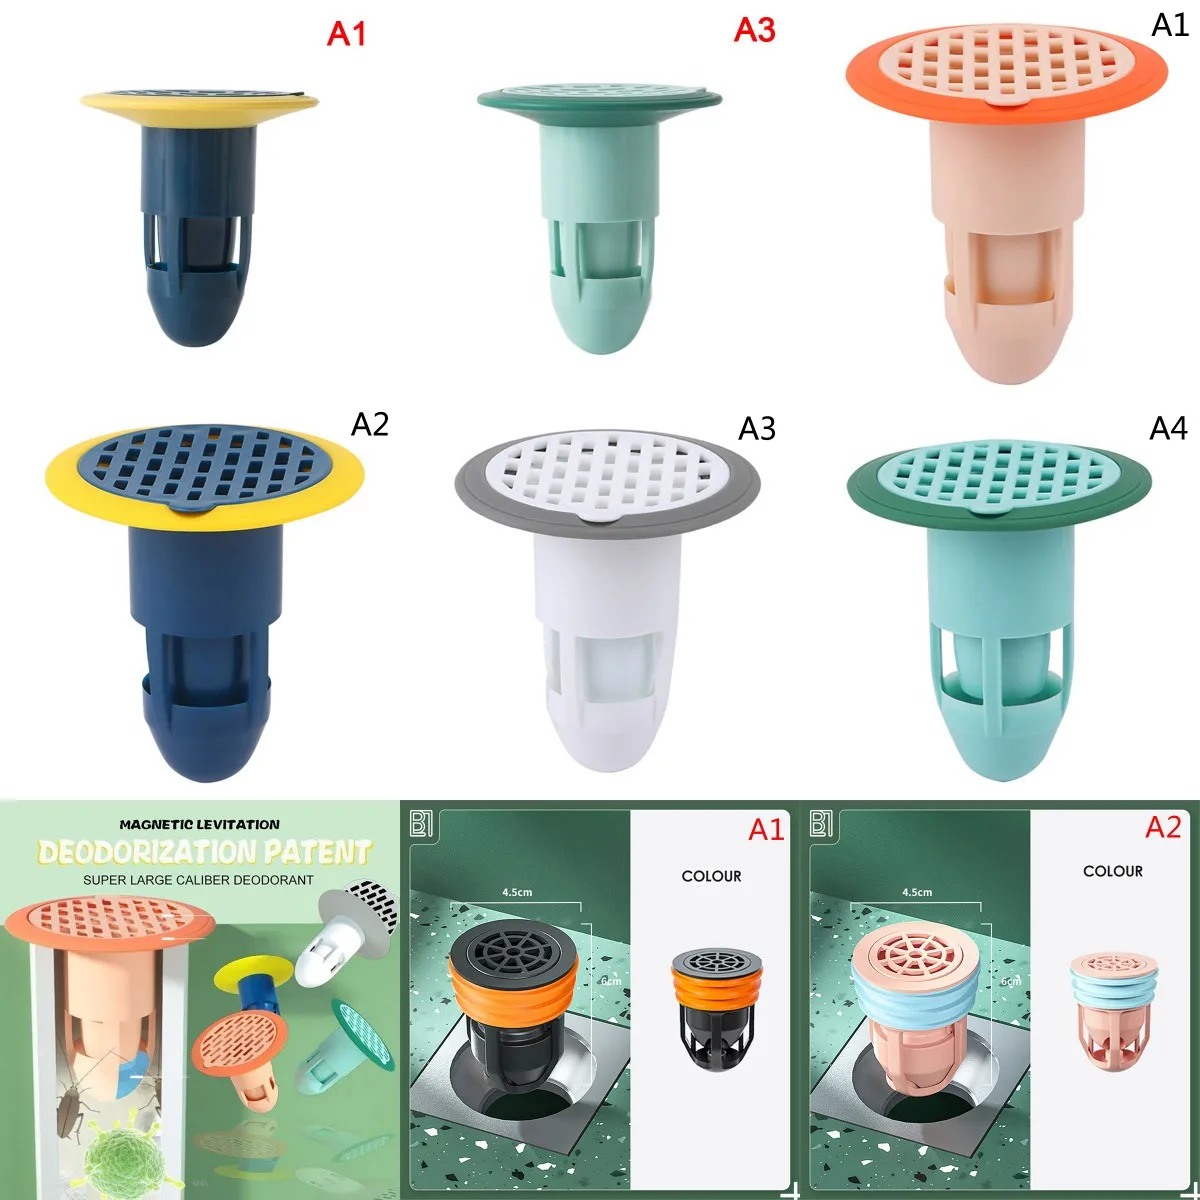 

14Types Bath Shower Floor Strainer Cover Plug Trap Anti-odor Sink Bathroom Water Drain Filter Insect Prevention Deodorant